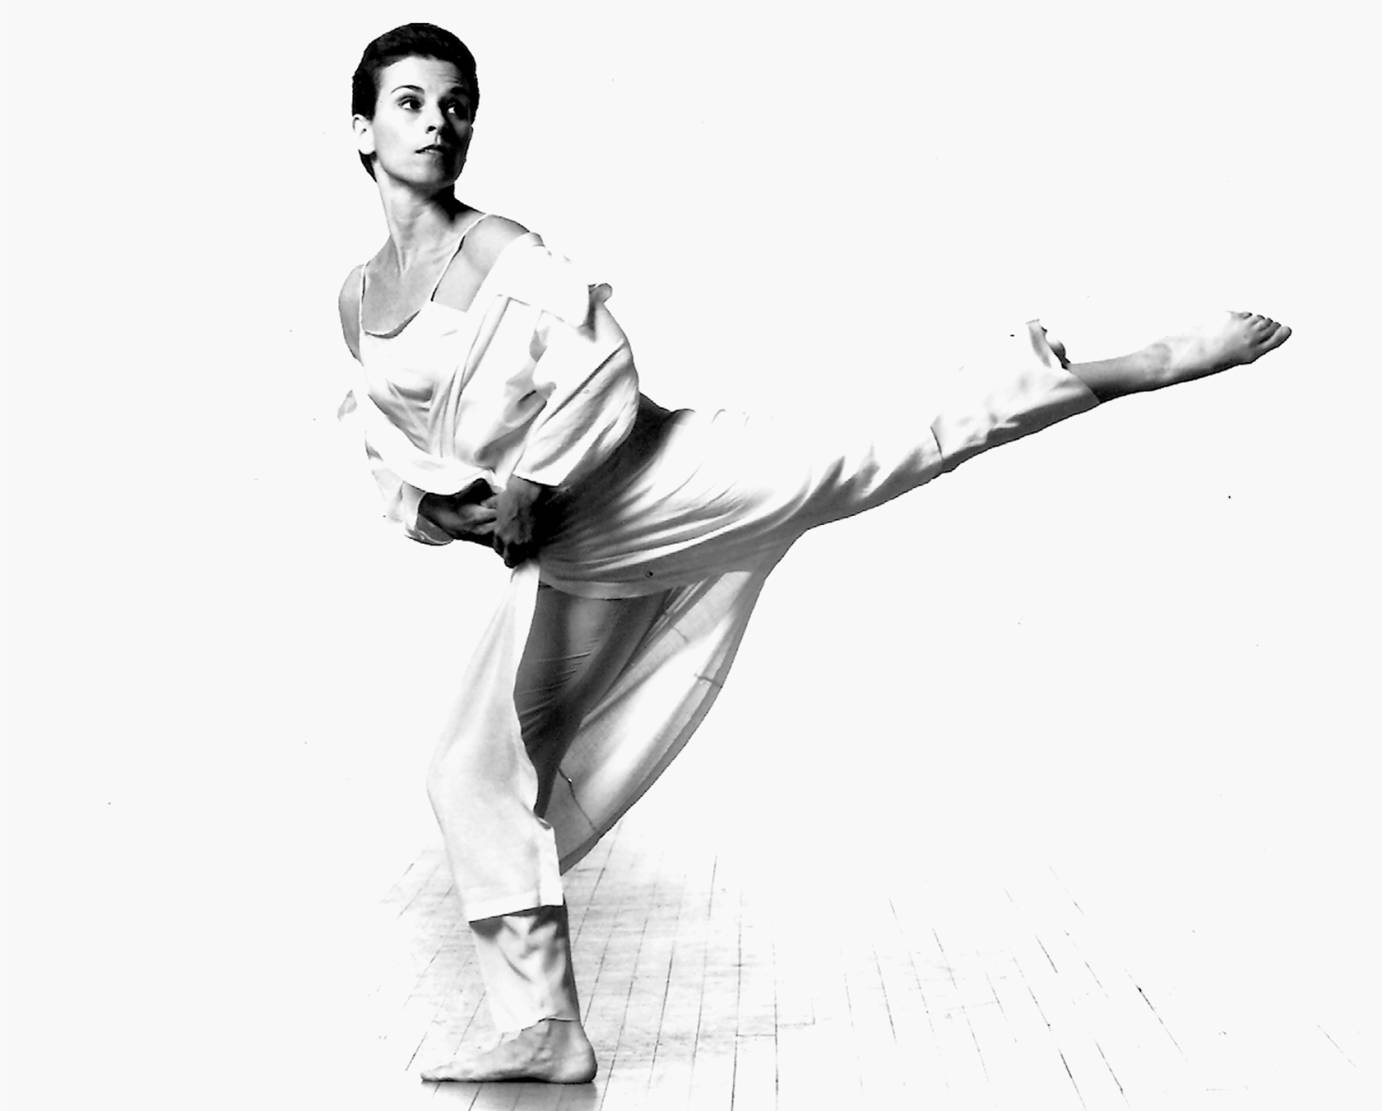 carolyn dorfman dressed in a white silky pant suit and jacket strikes an arabesque against a white background. she looks to her foot as if being called by someone